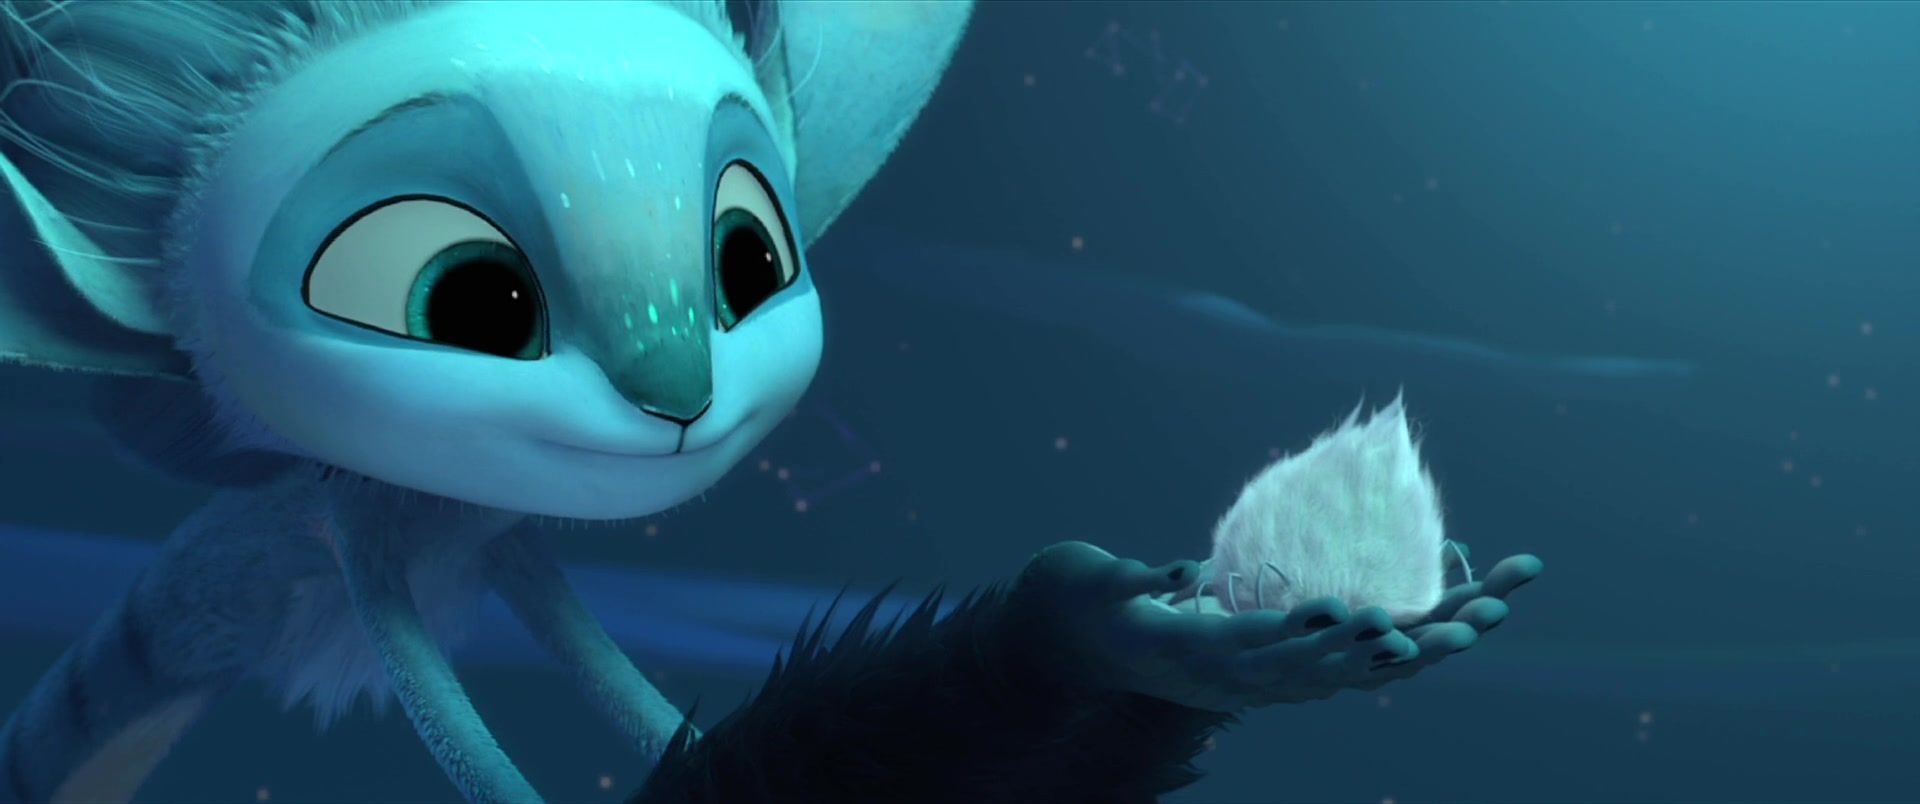 Image For Mune: Guardian of the Moon. Fancaps.net. Guardian of the moon, Cartoon art, Character design inspiration